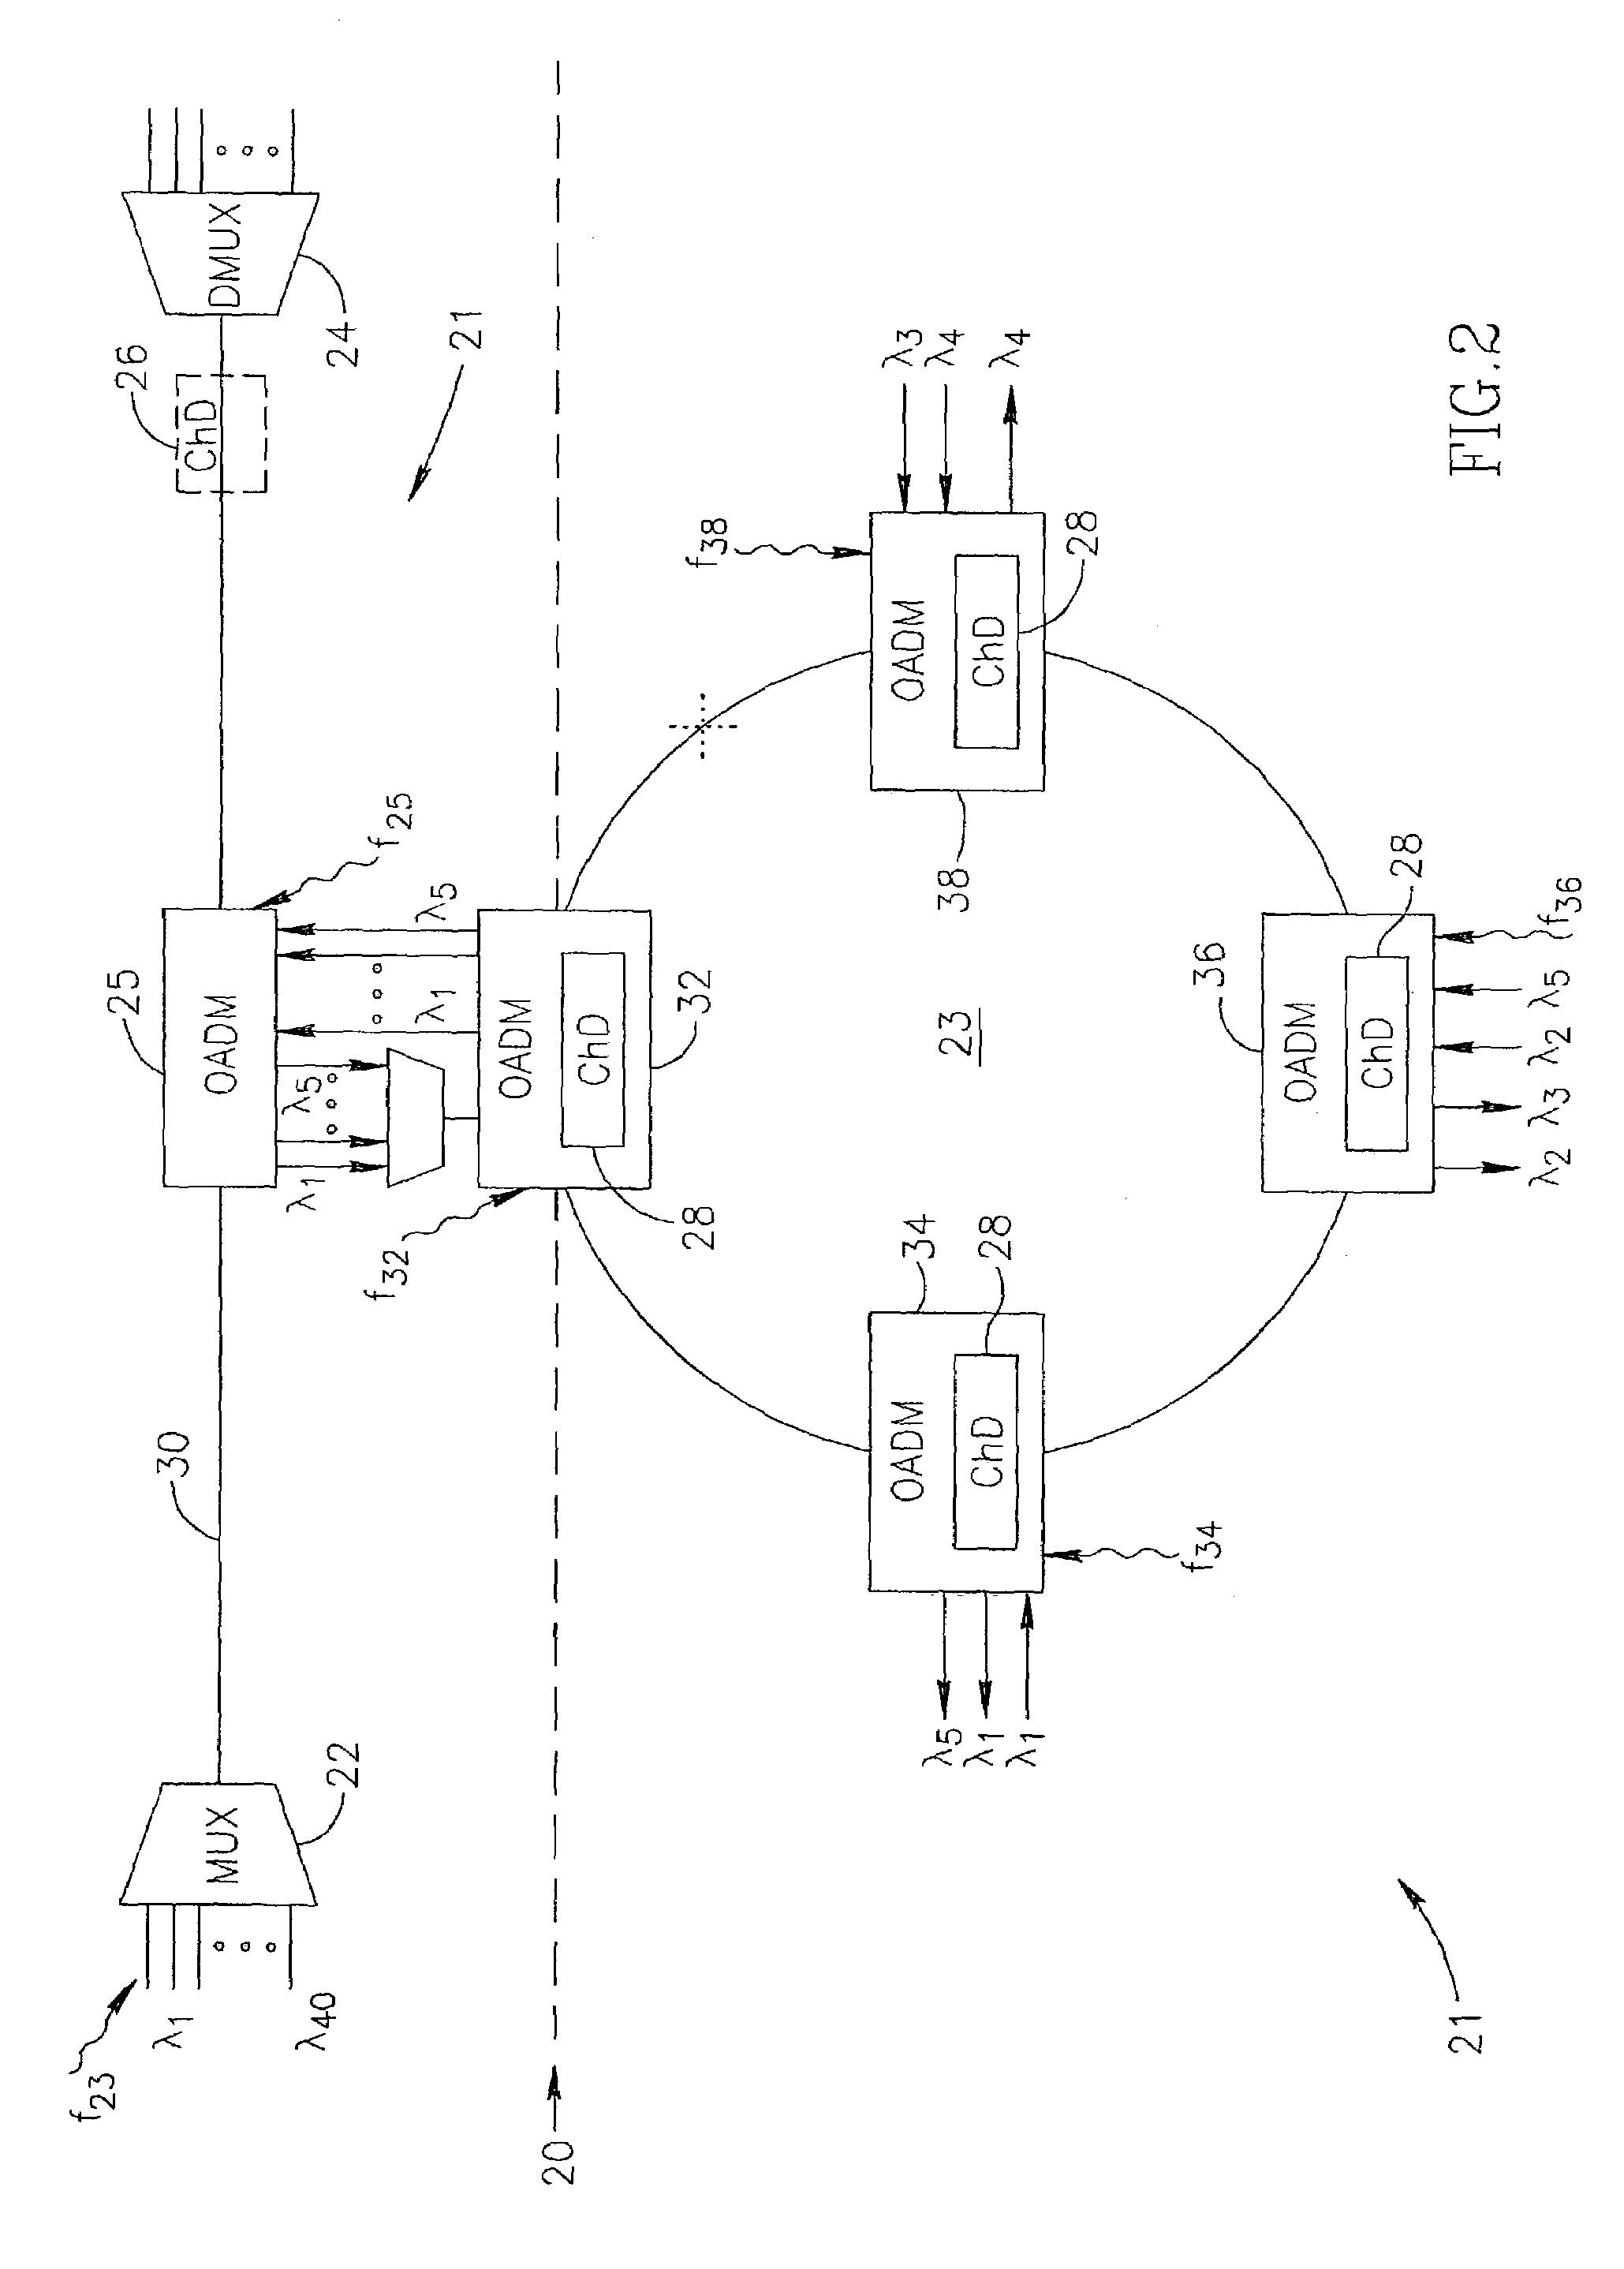 Method of locating faults in optical telecommunication networks